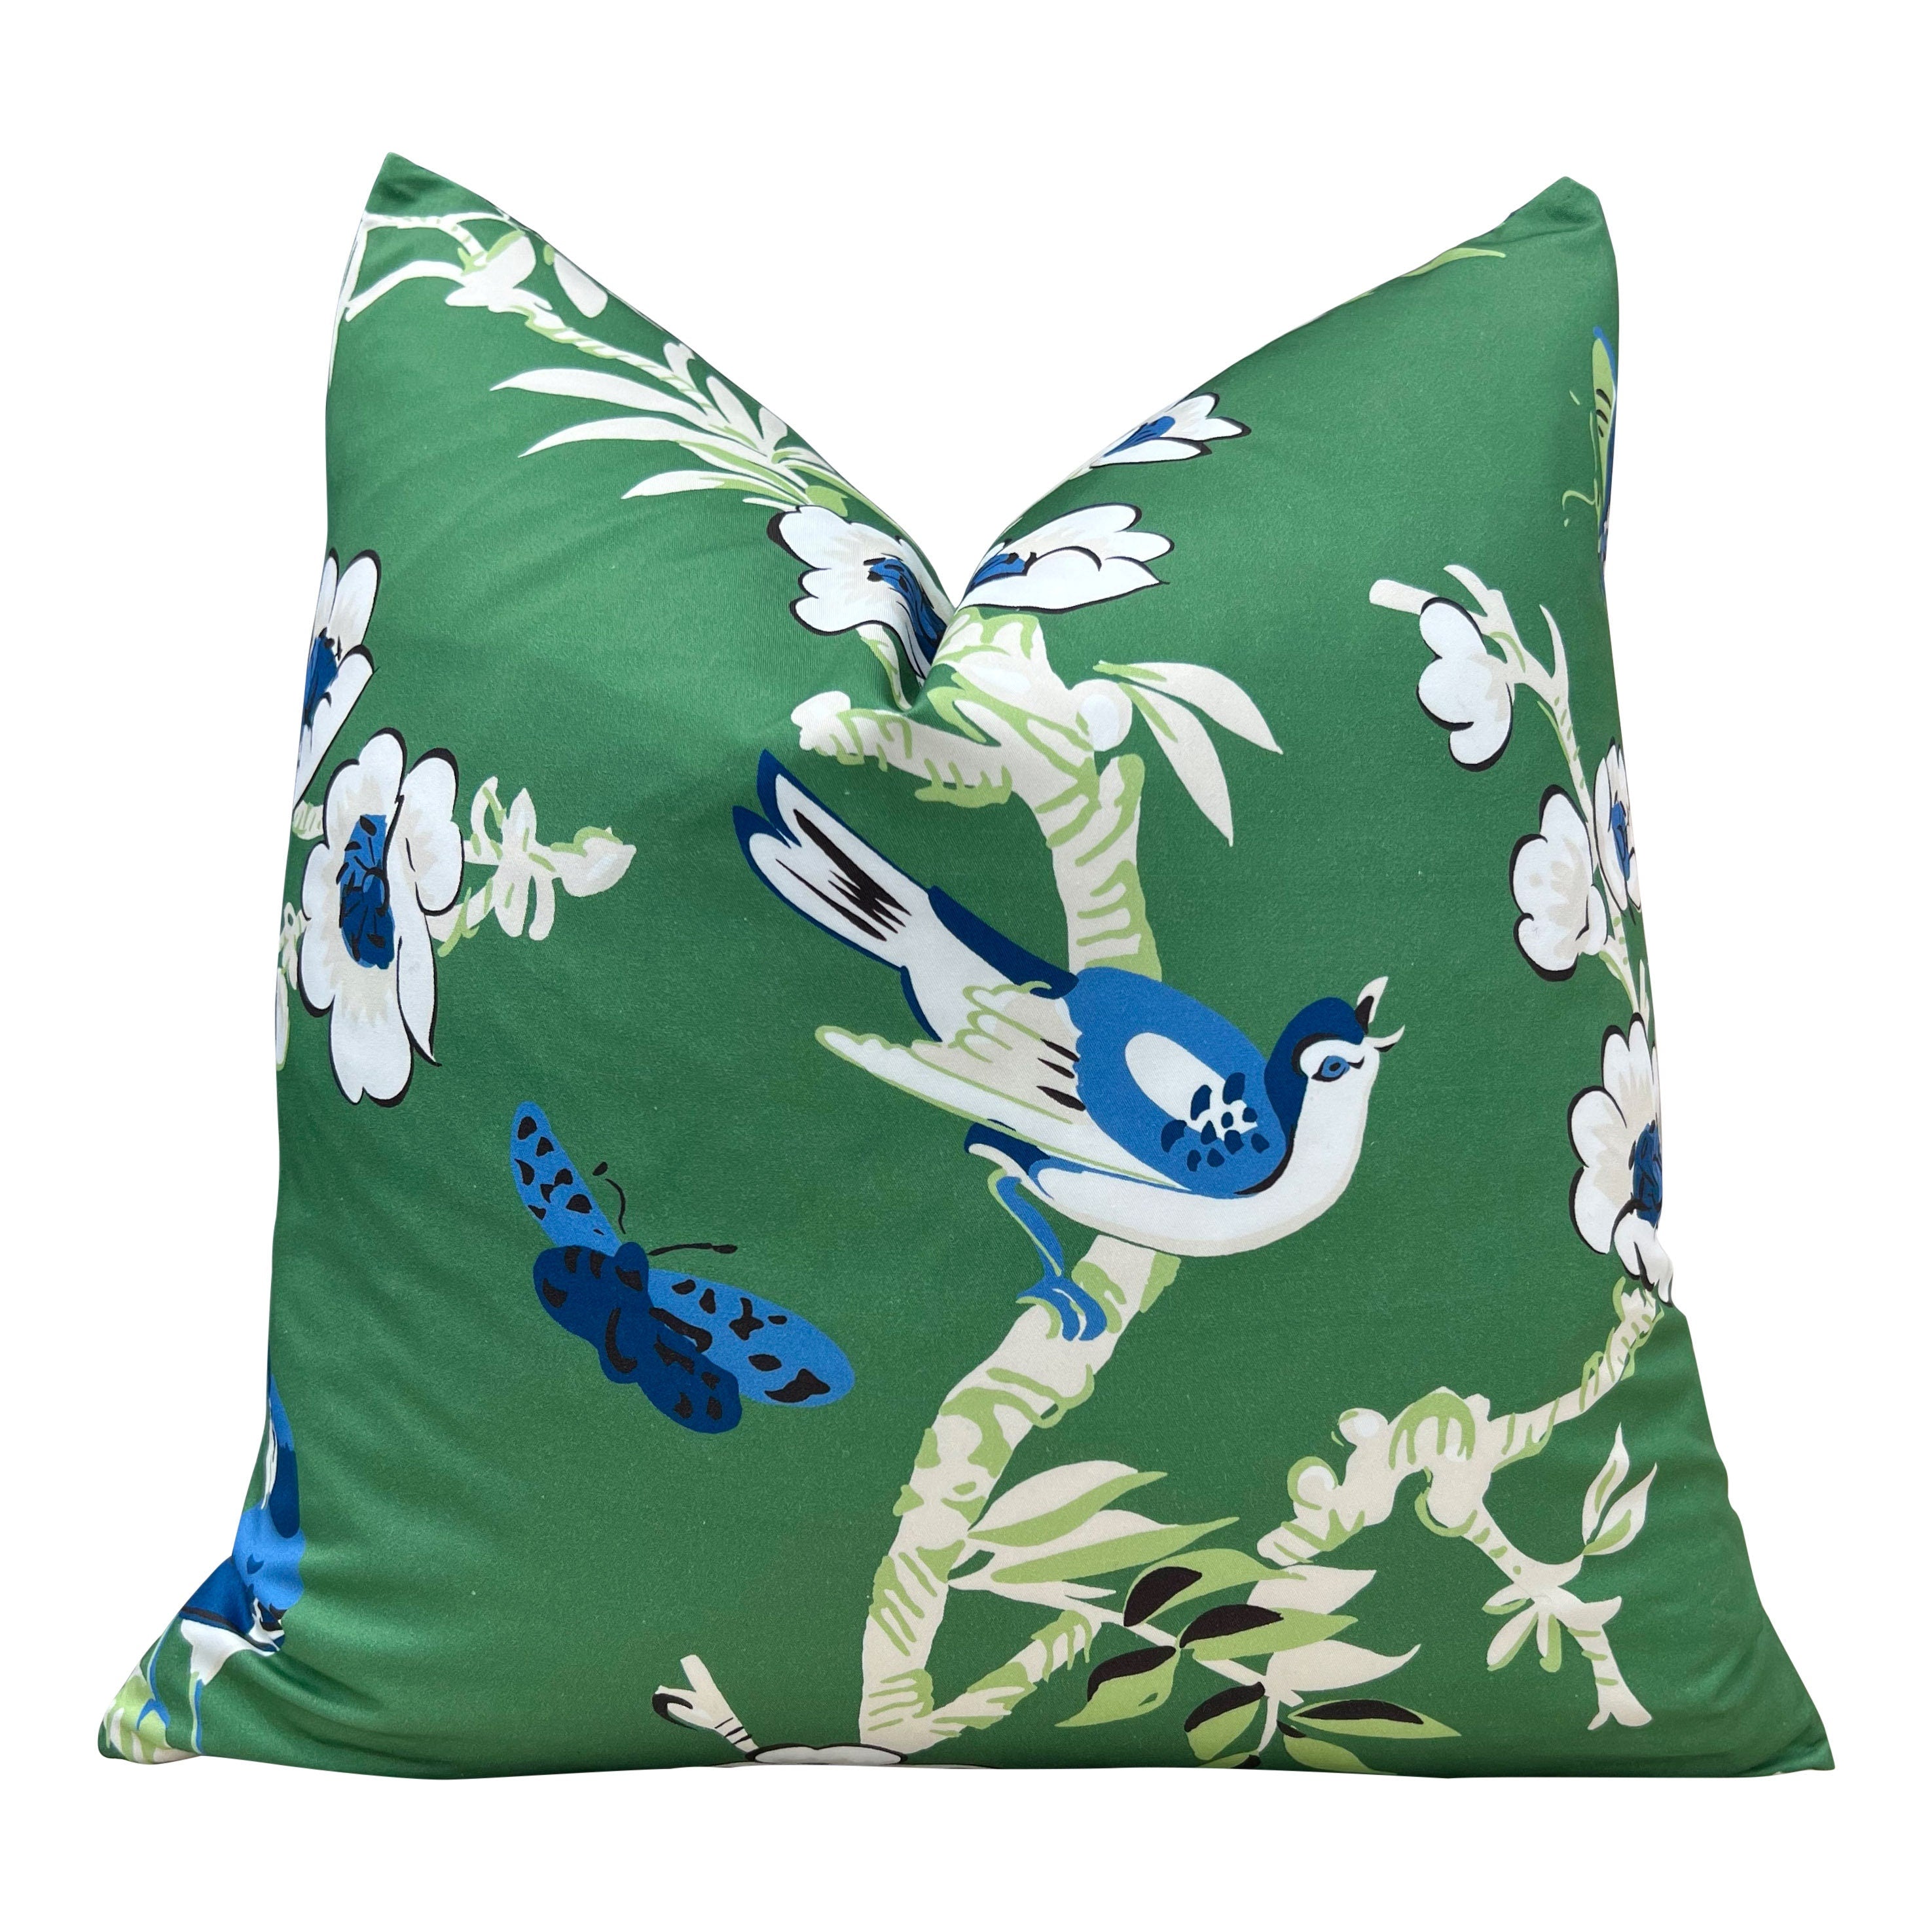 Designer Floral Decorative Pillow in Green and Blue. Thibaut Yukio High End Accent Pillow in Green, Chinoiserie Cushion Cover Euro Sham